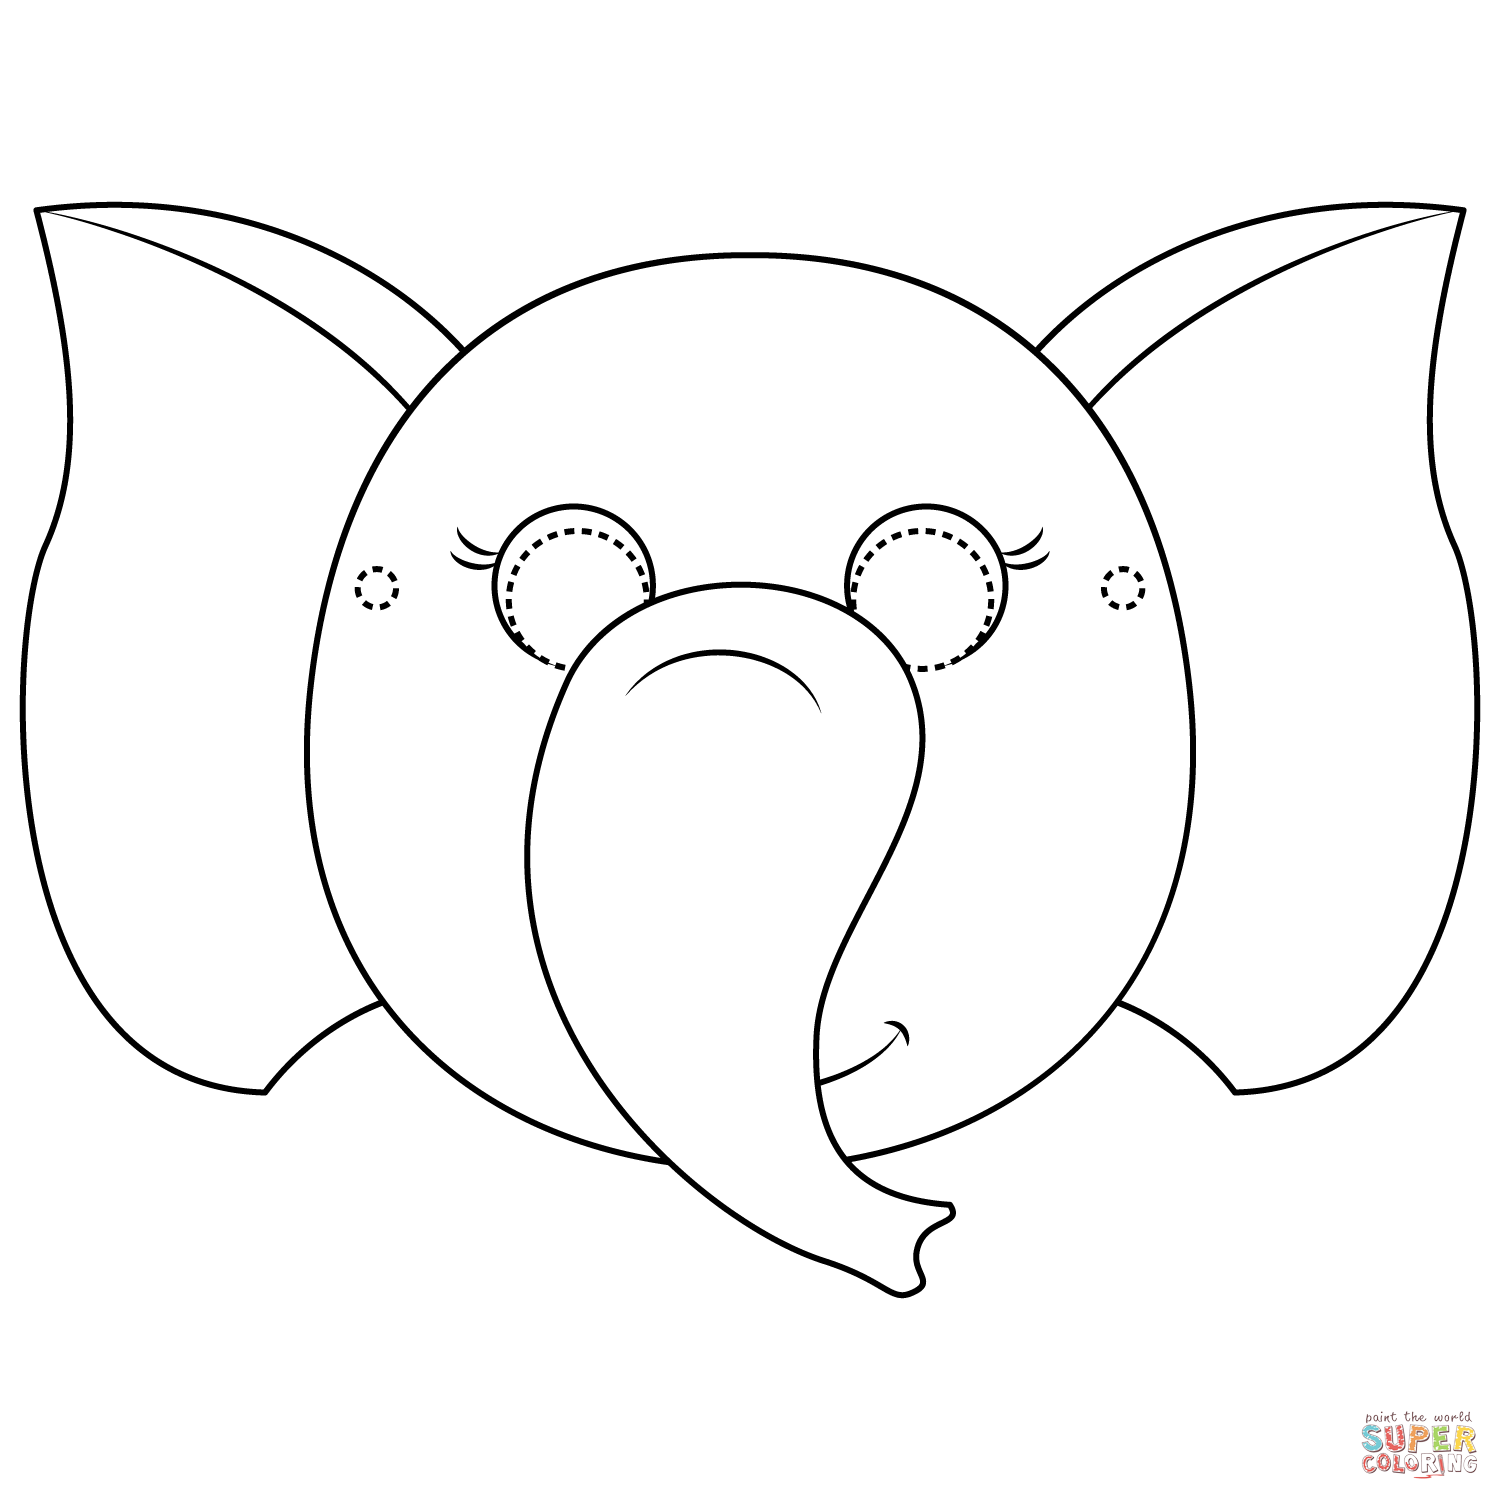 Elephant Mask coloring page | Free Printable Coloring Pages